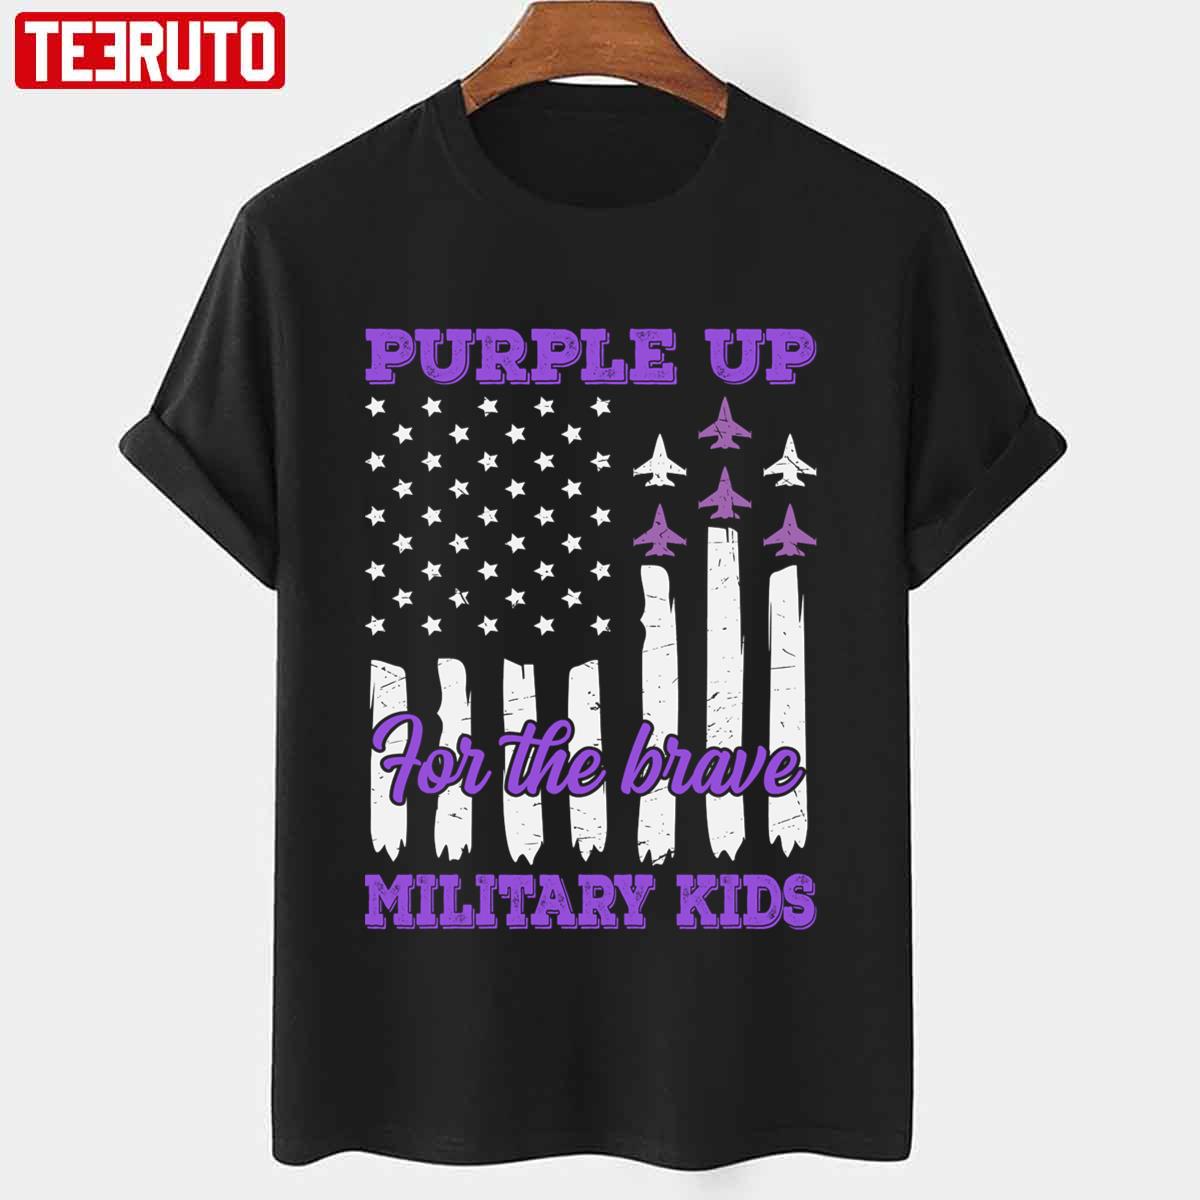 For The Brave Military Kids Purple Up For Military Children Army Kids Unisex T-shirt